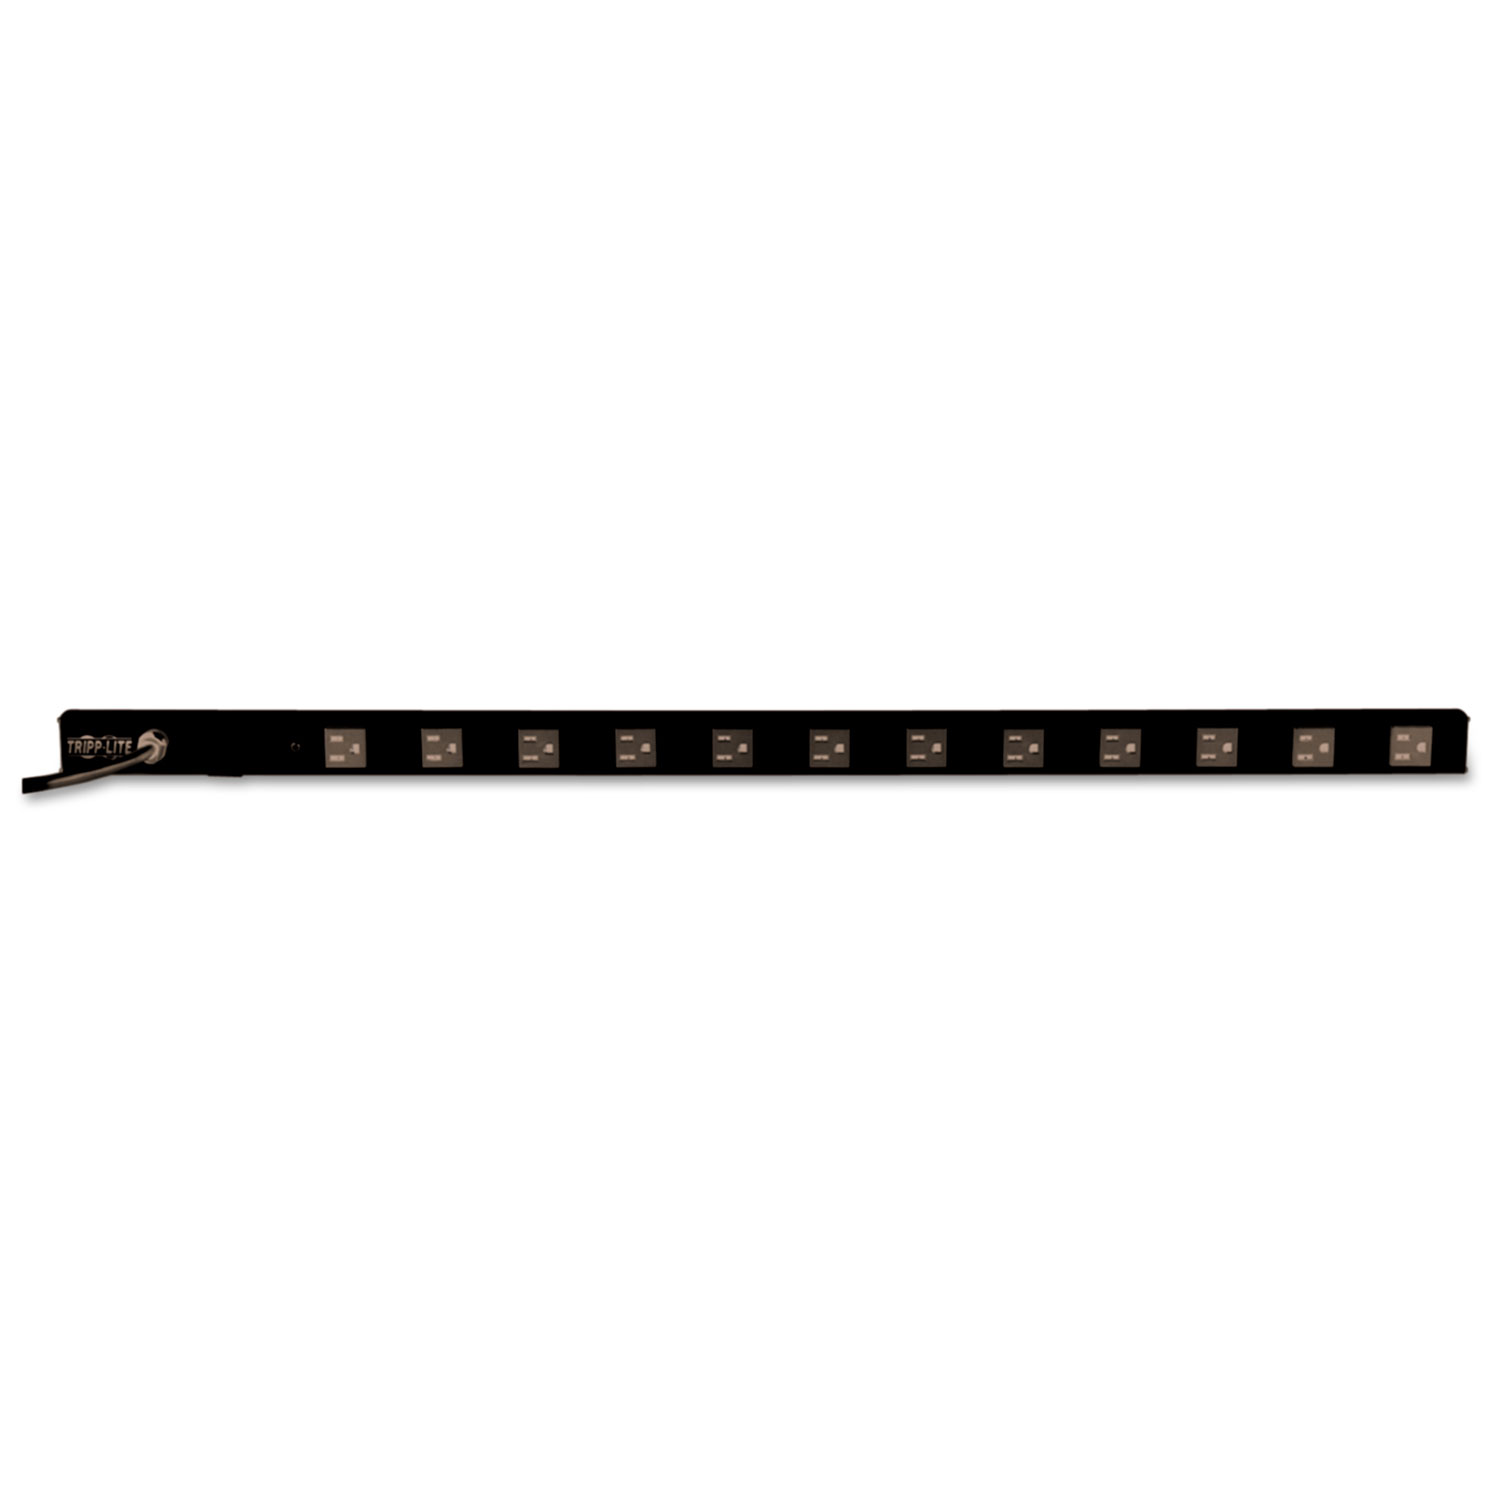  Tripp Lite PS361206 Vertical Power Strip, 12 Outlets, 6 ft. Cord, 36 Length (TRPPS361206) 